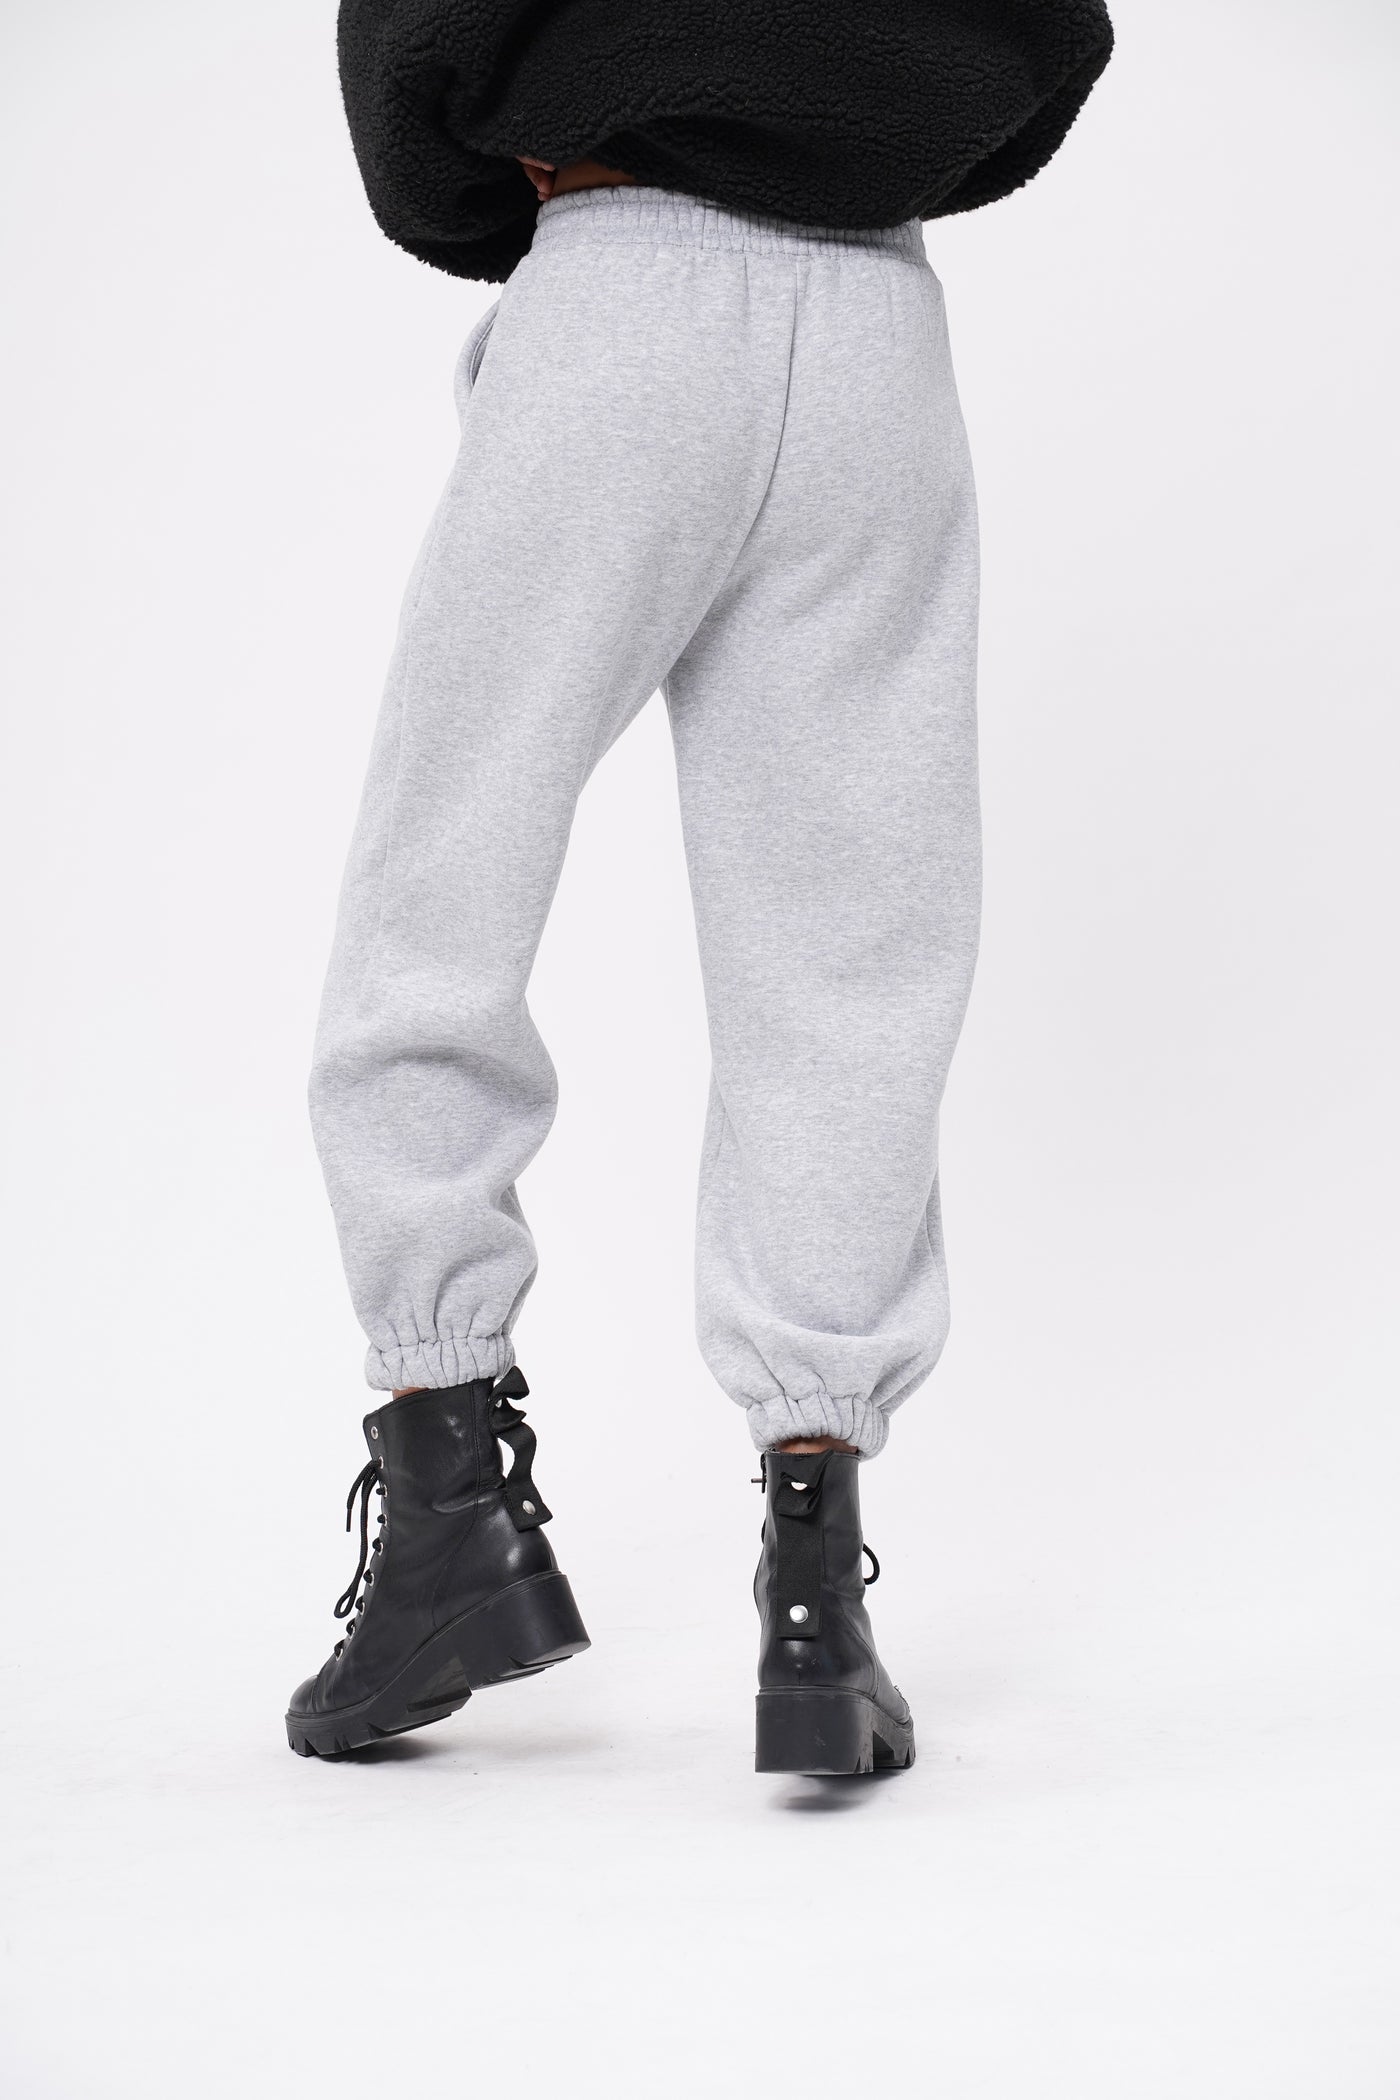 [EVERYDAY] Don’t Sweat It Essential Jogger Pants - Stone